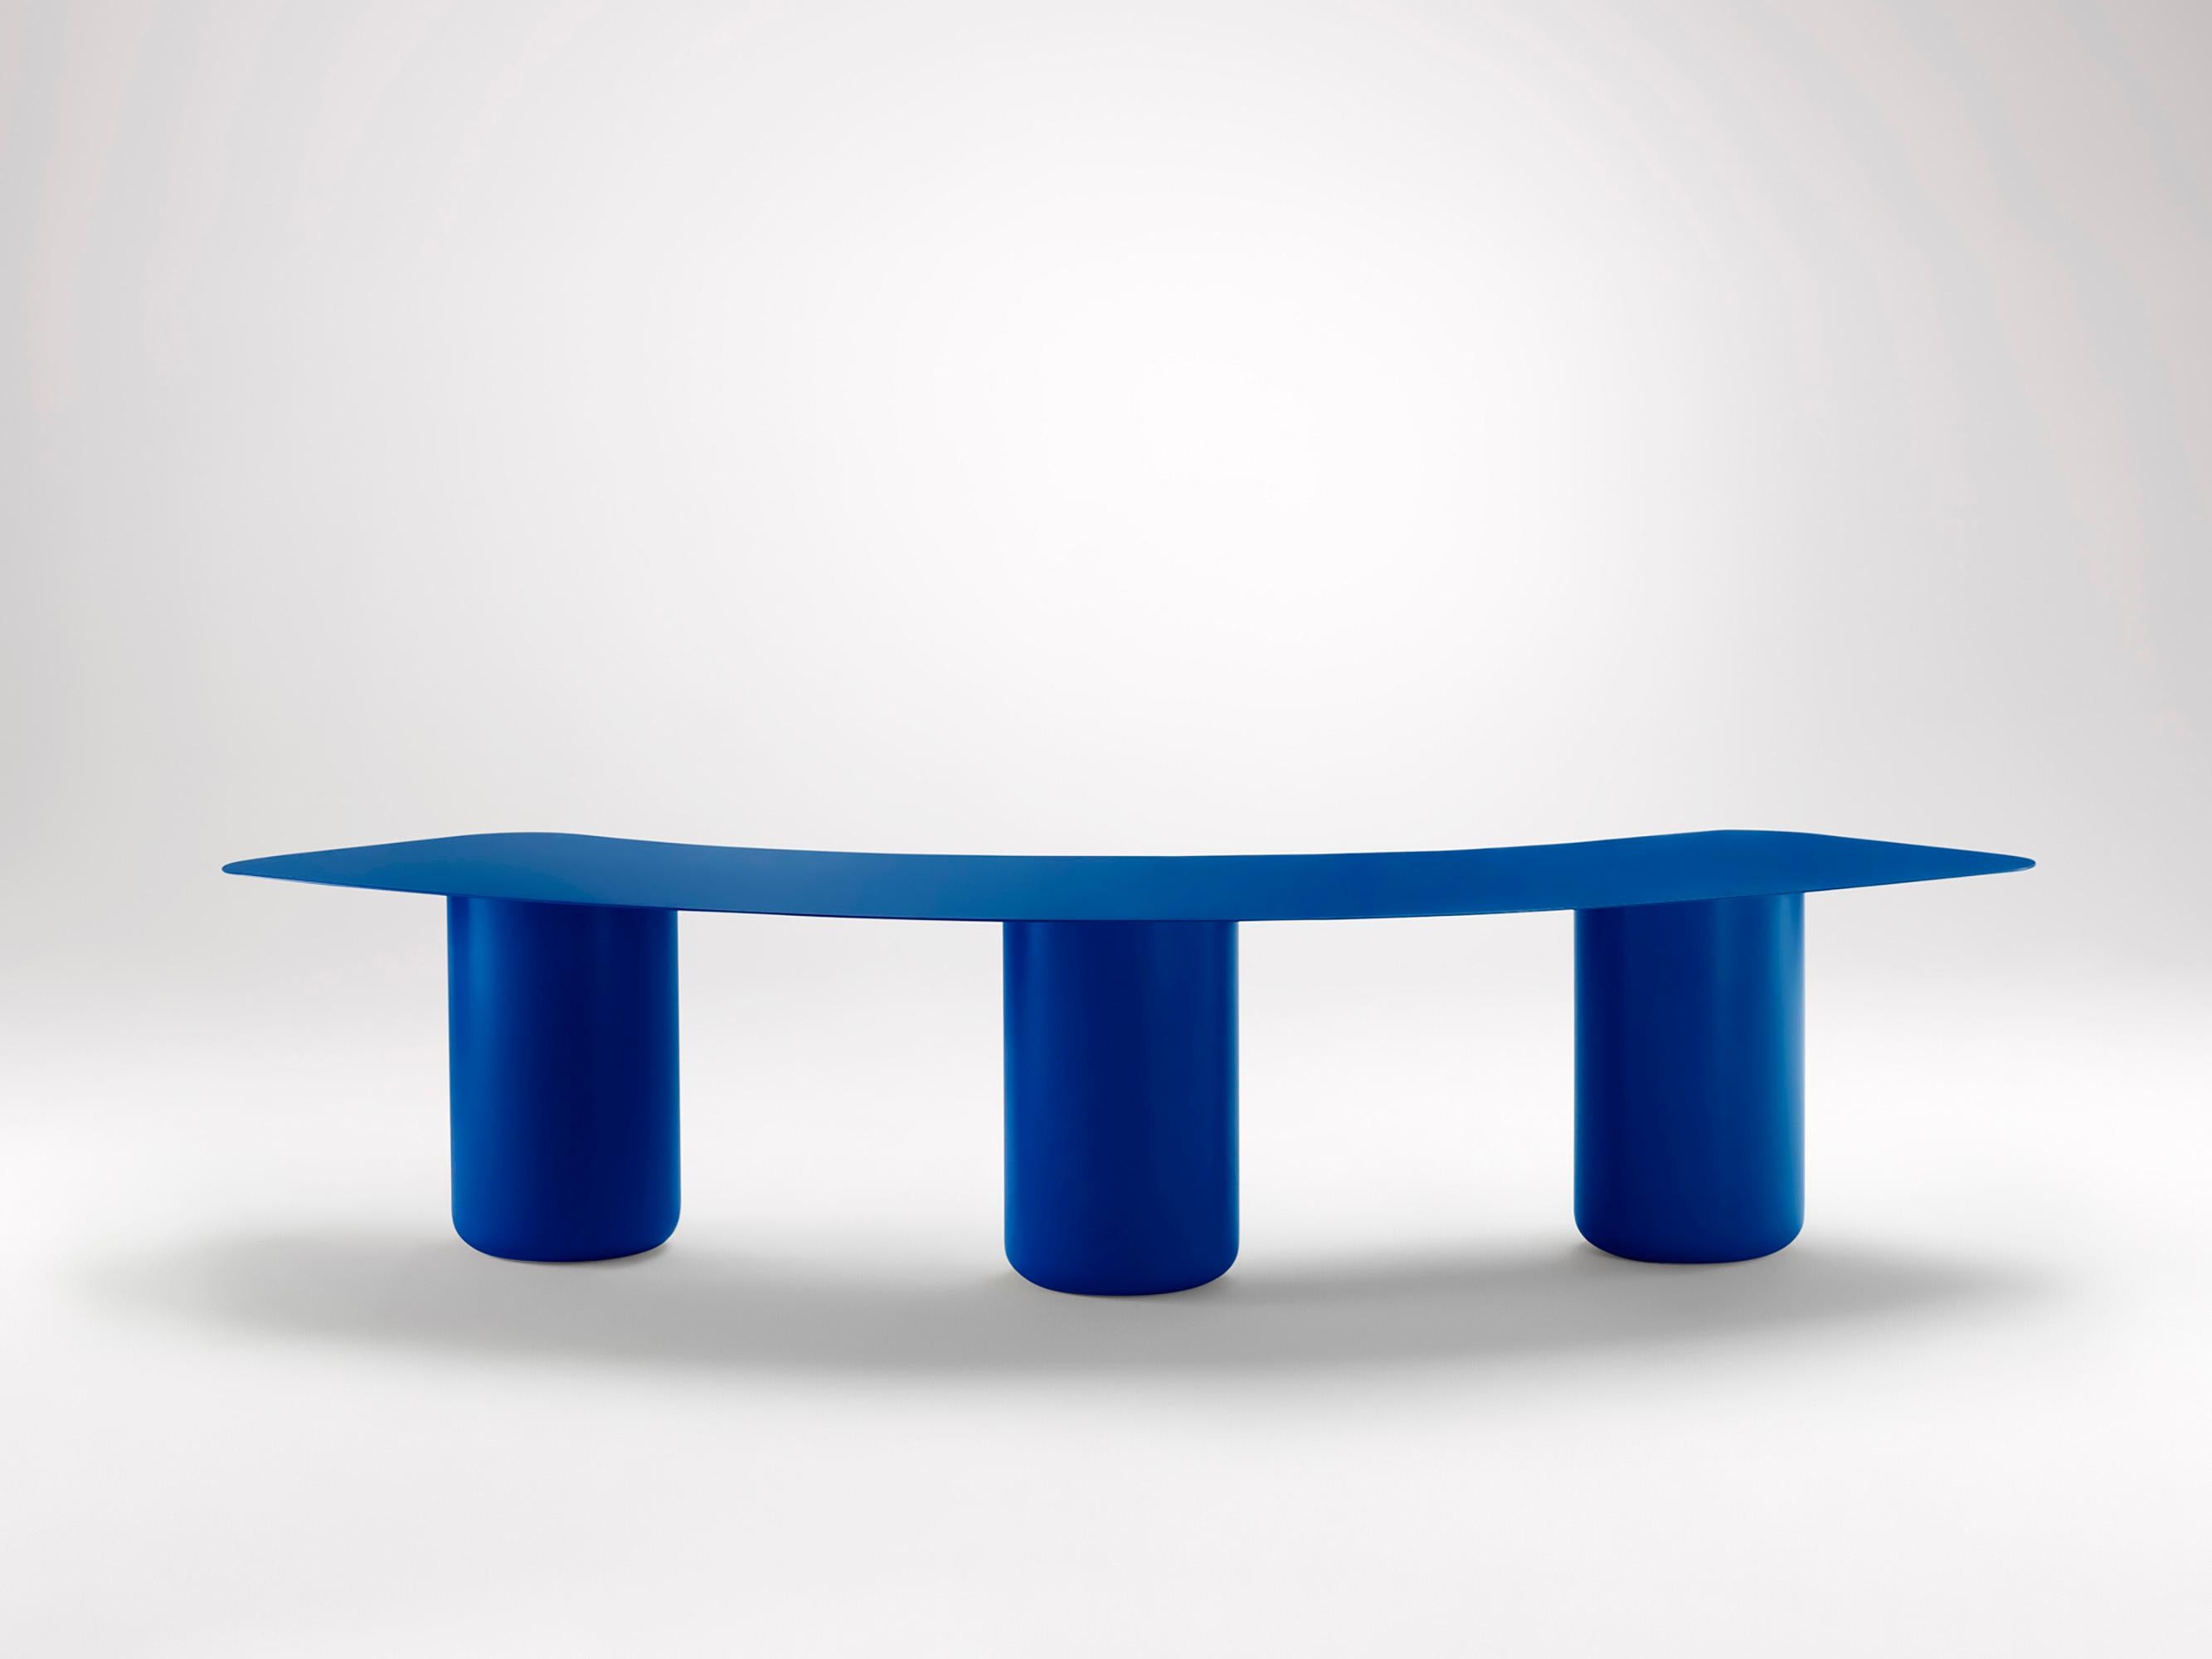 Large Vivid Blue Curved Bench by Coco Flip
Dimensions: D 75 x W 200 x H 42 cm
Materials: Mild steel, powder-coated with zinc undercoat. 
Weight: 44 kg

Coco Flip is a Melbourne based furniture and lighting design studio, run by us, Kate Stokes and